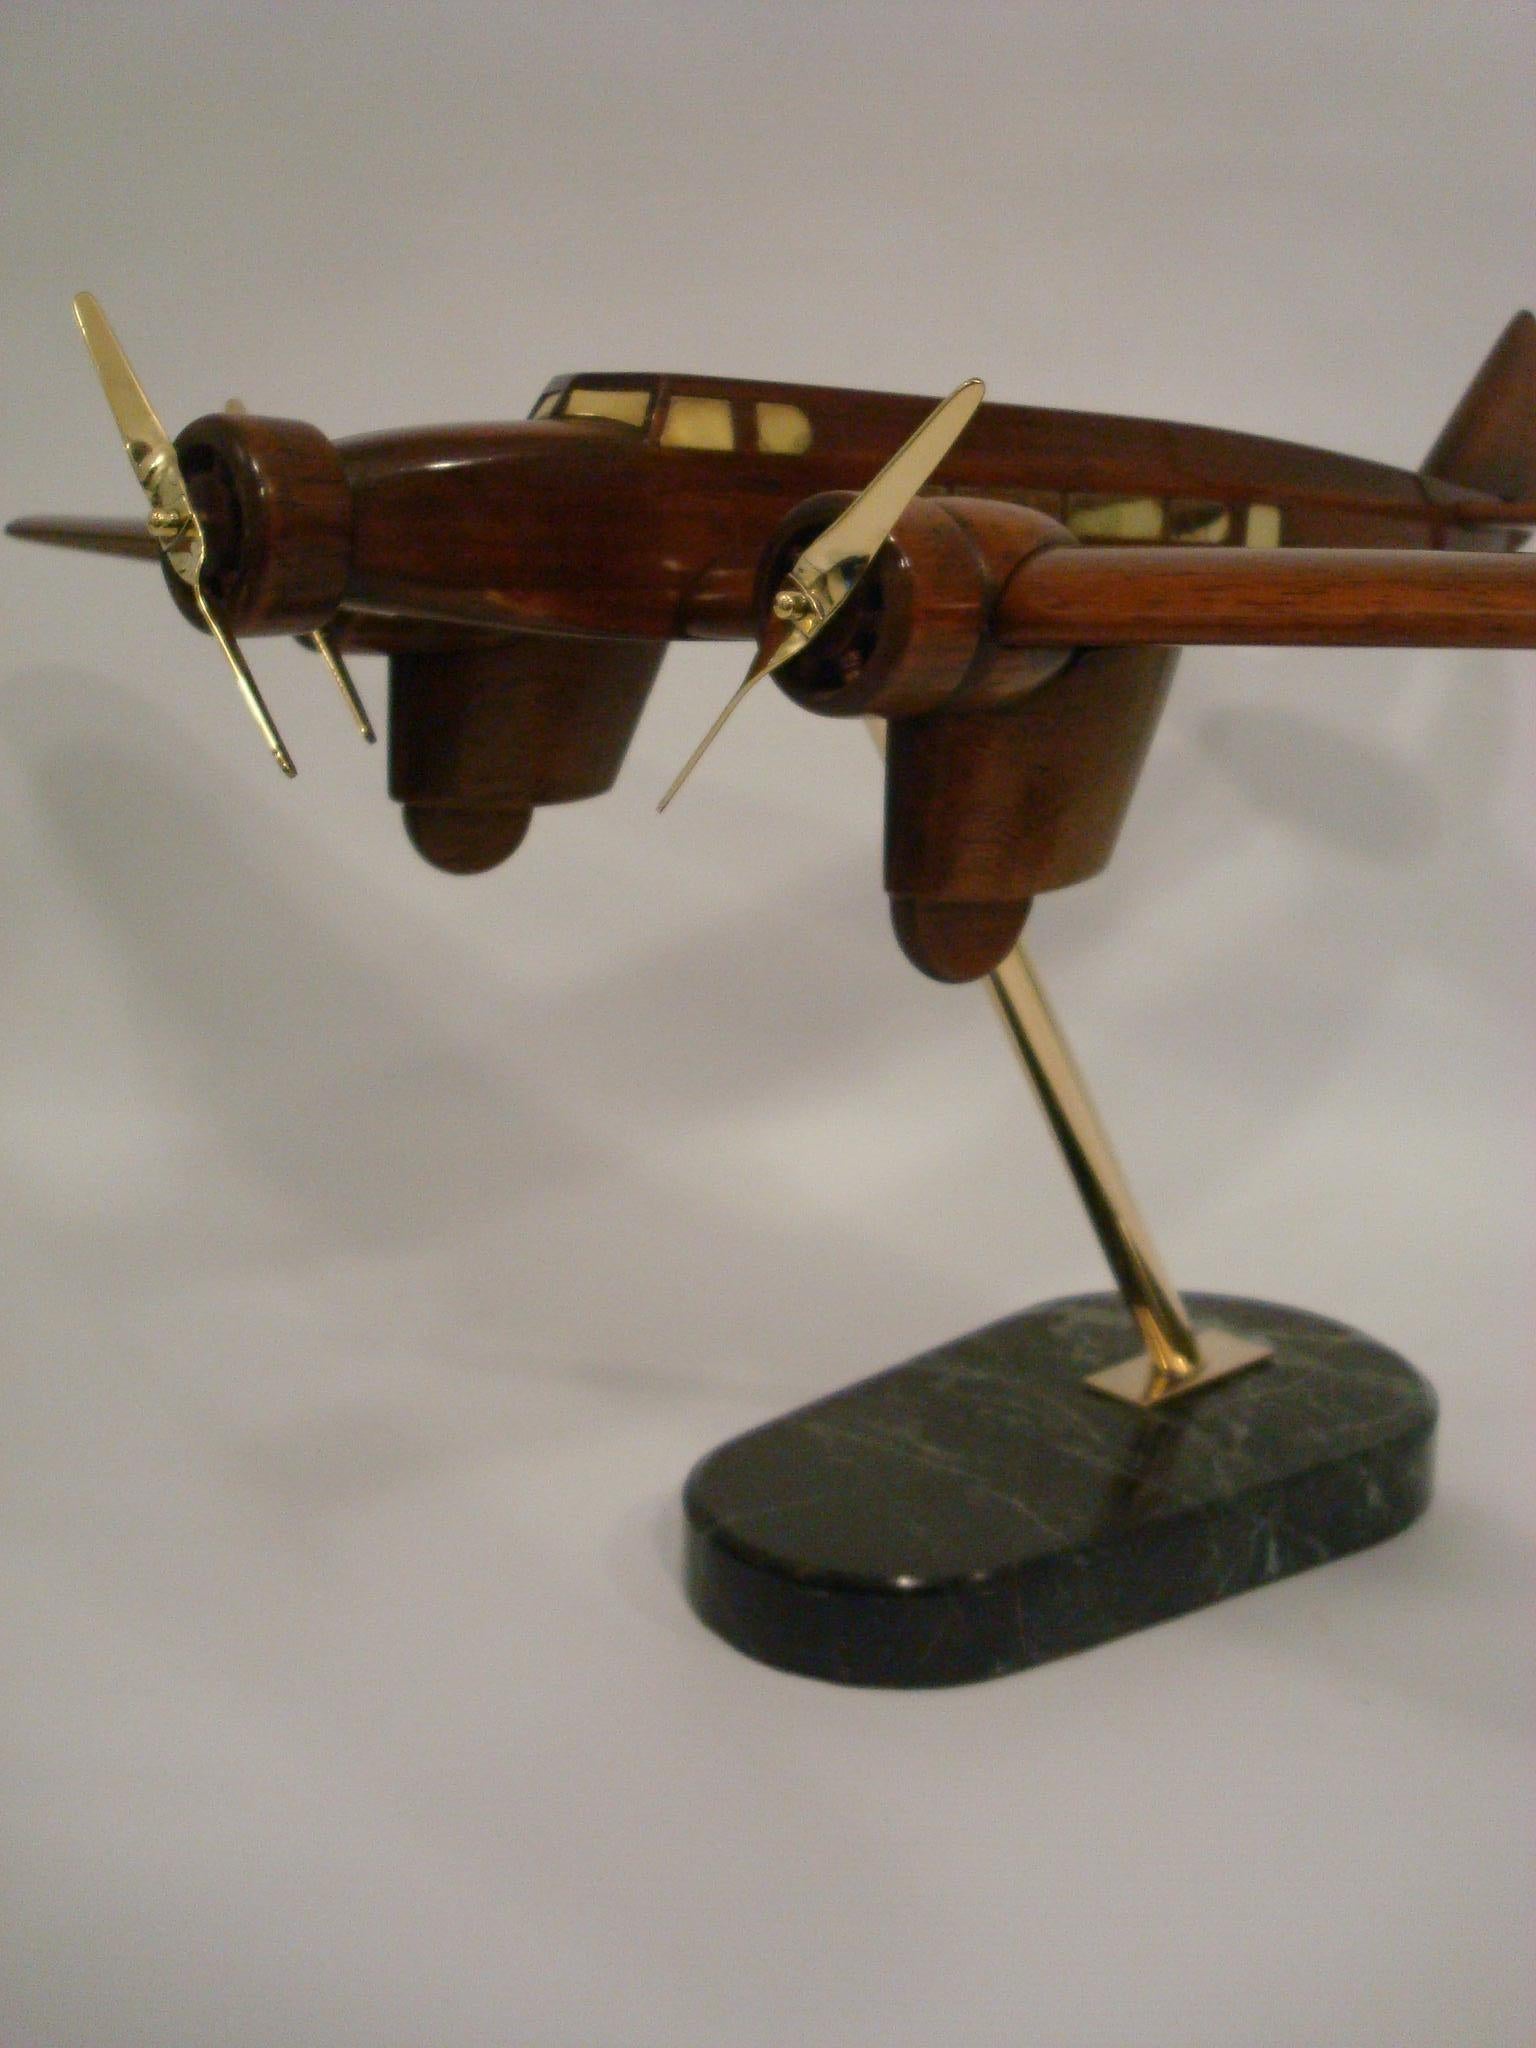 Art Deco Dewoitine Wooden Counters Desk Model Airplane 1930s French For Sale 1